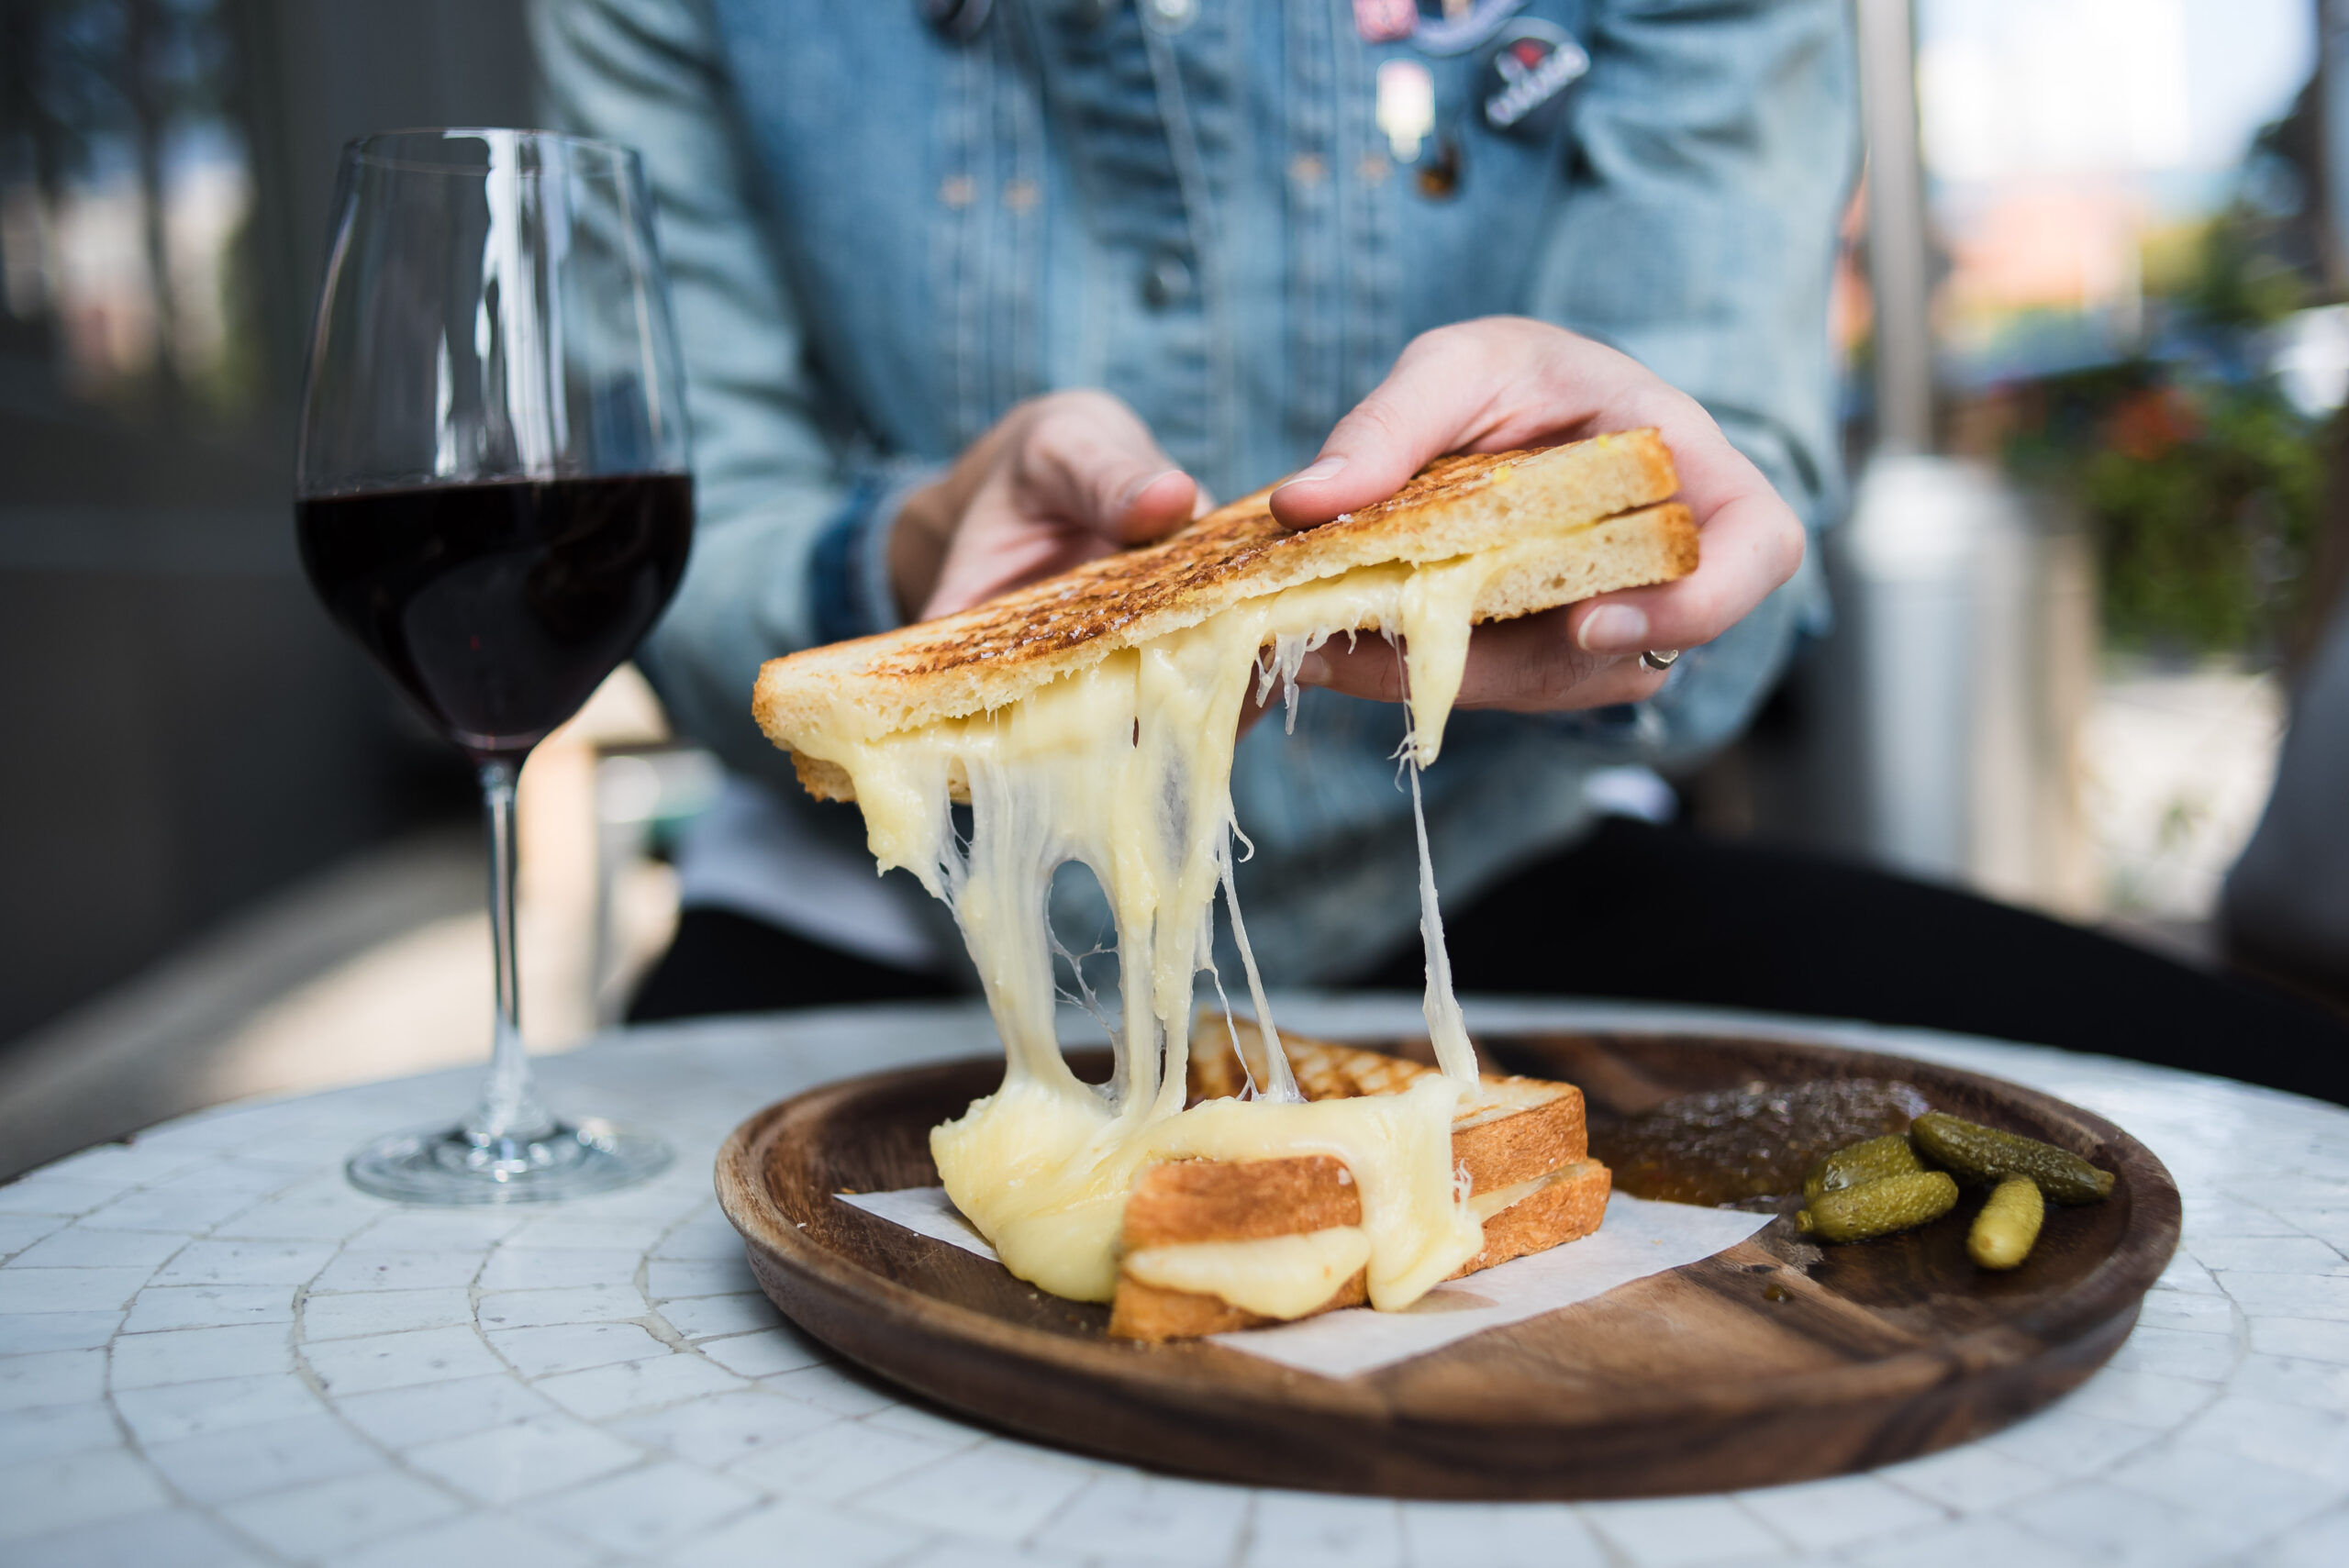 Holding Grilled Cheese with a glass of red wine